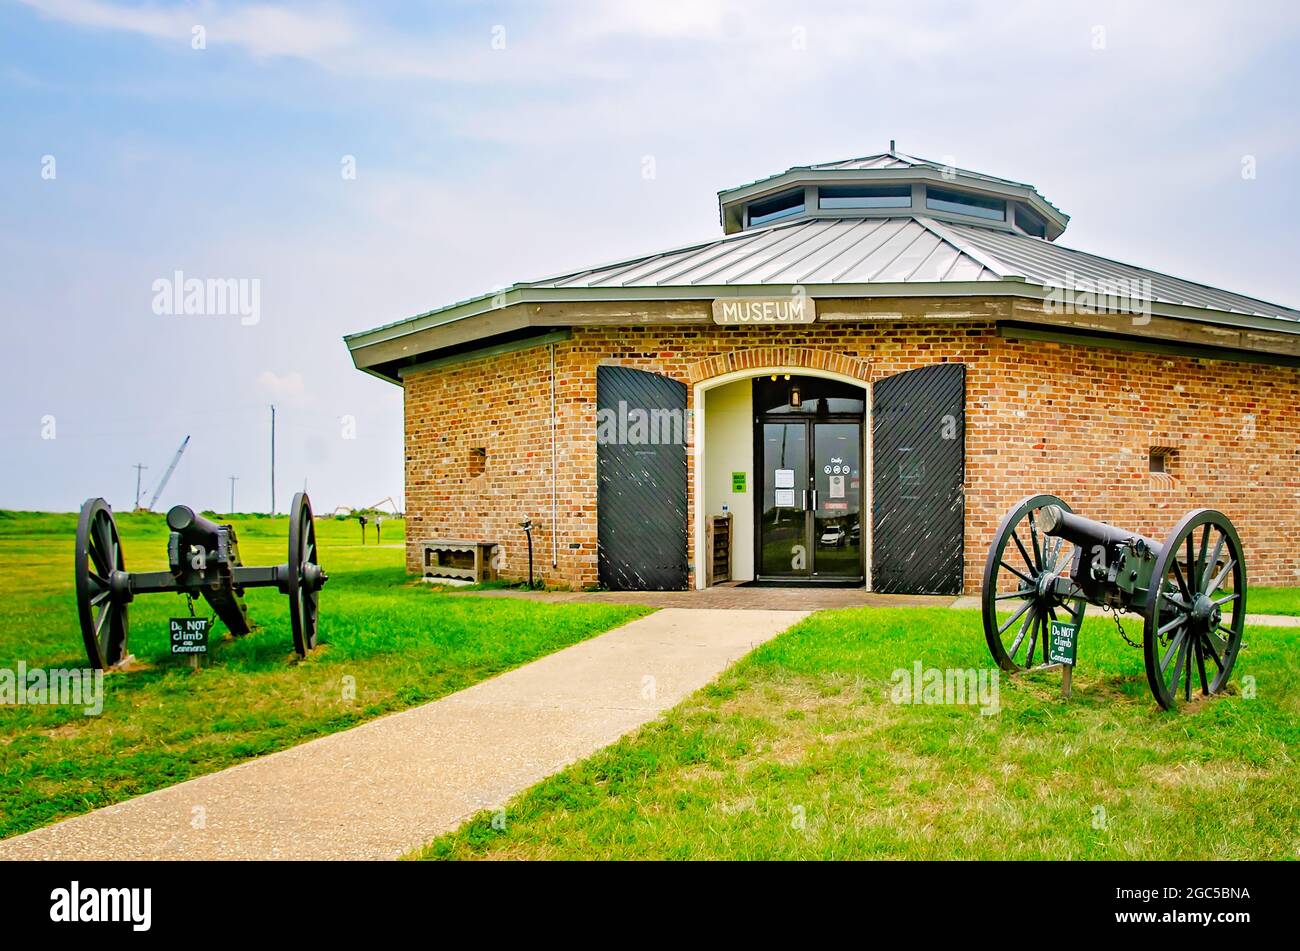 Cannons stand in front of the museum at Fort Morgan, July 31, 2021, in Gulf Shores, Alabama. Fort Morgan was built in 1834. Stock Photo